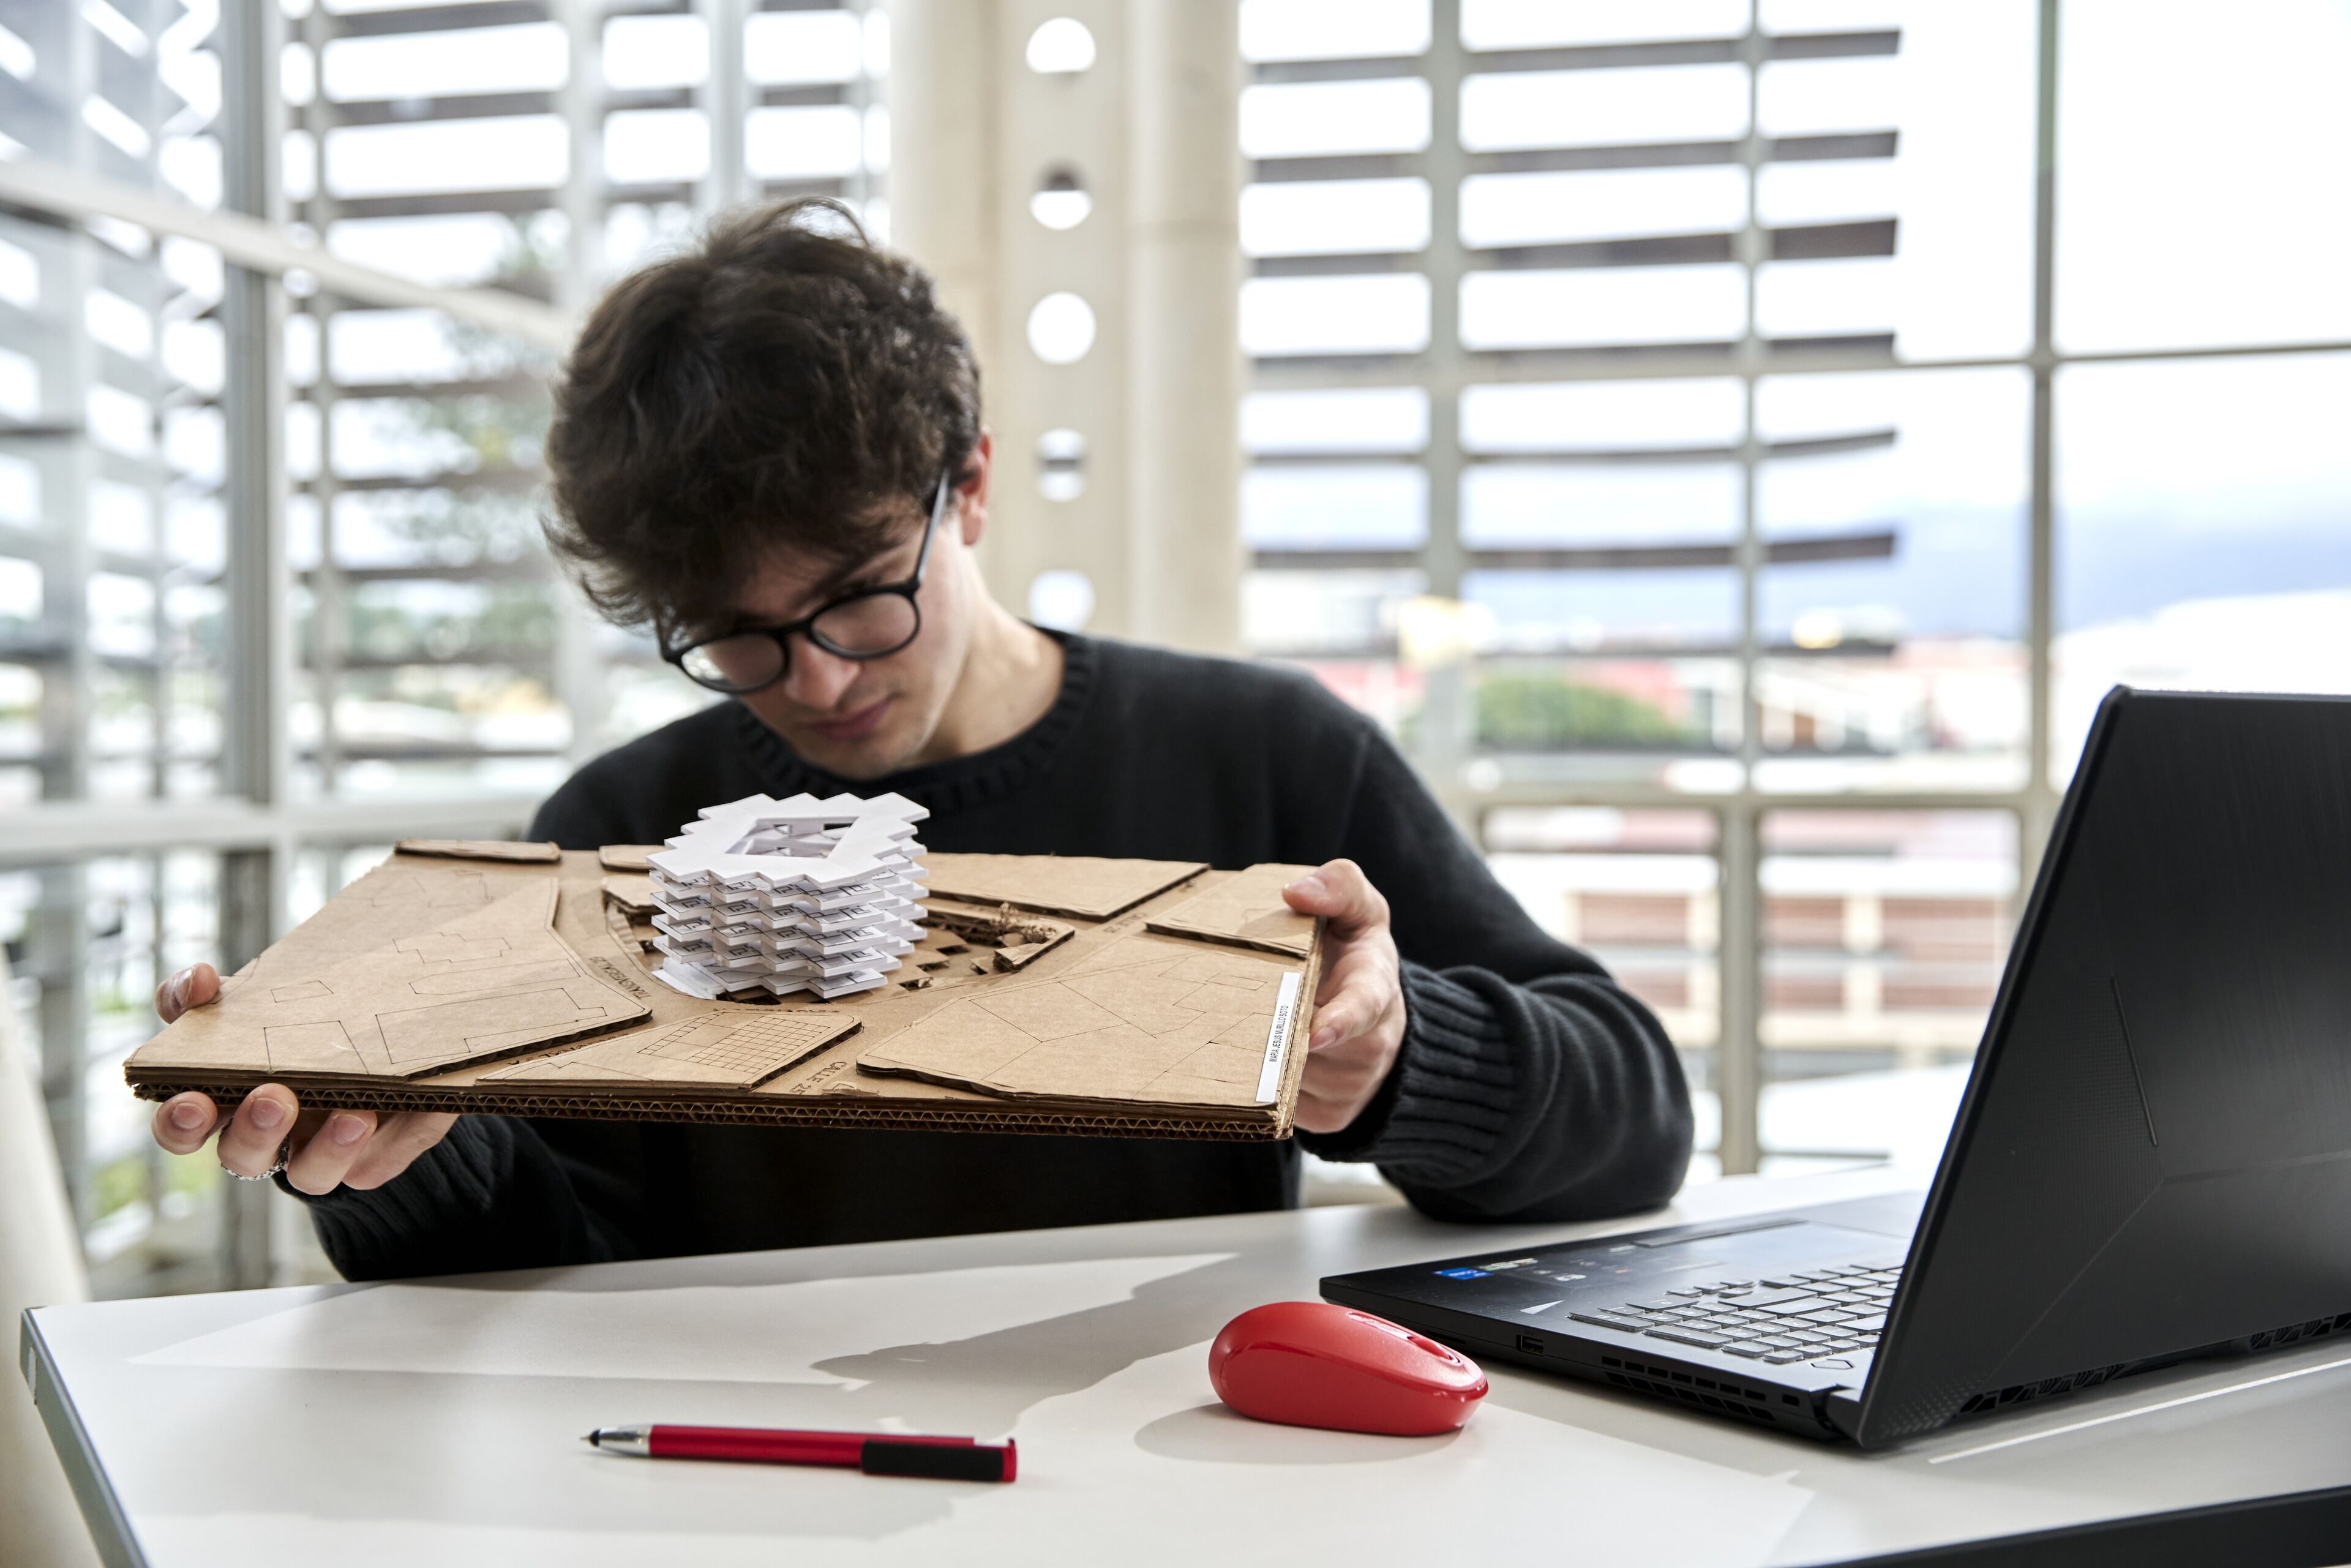 ImageA young architect intently examines a white architectural model on a cardboard base, with a laptop and red mouse on the table.